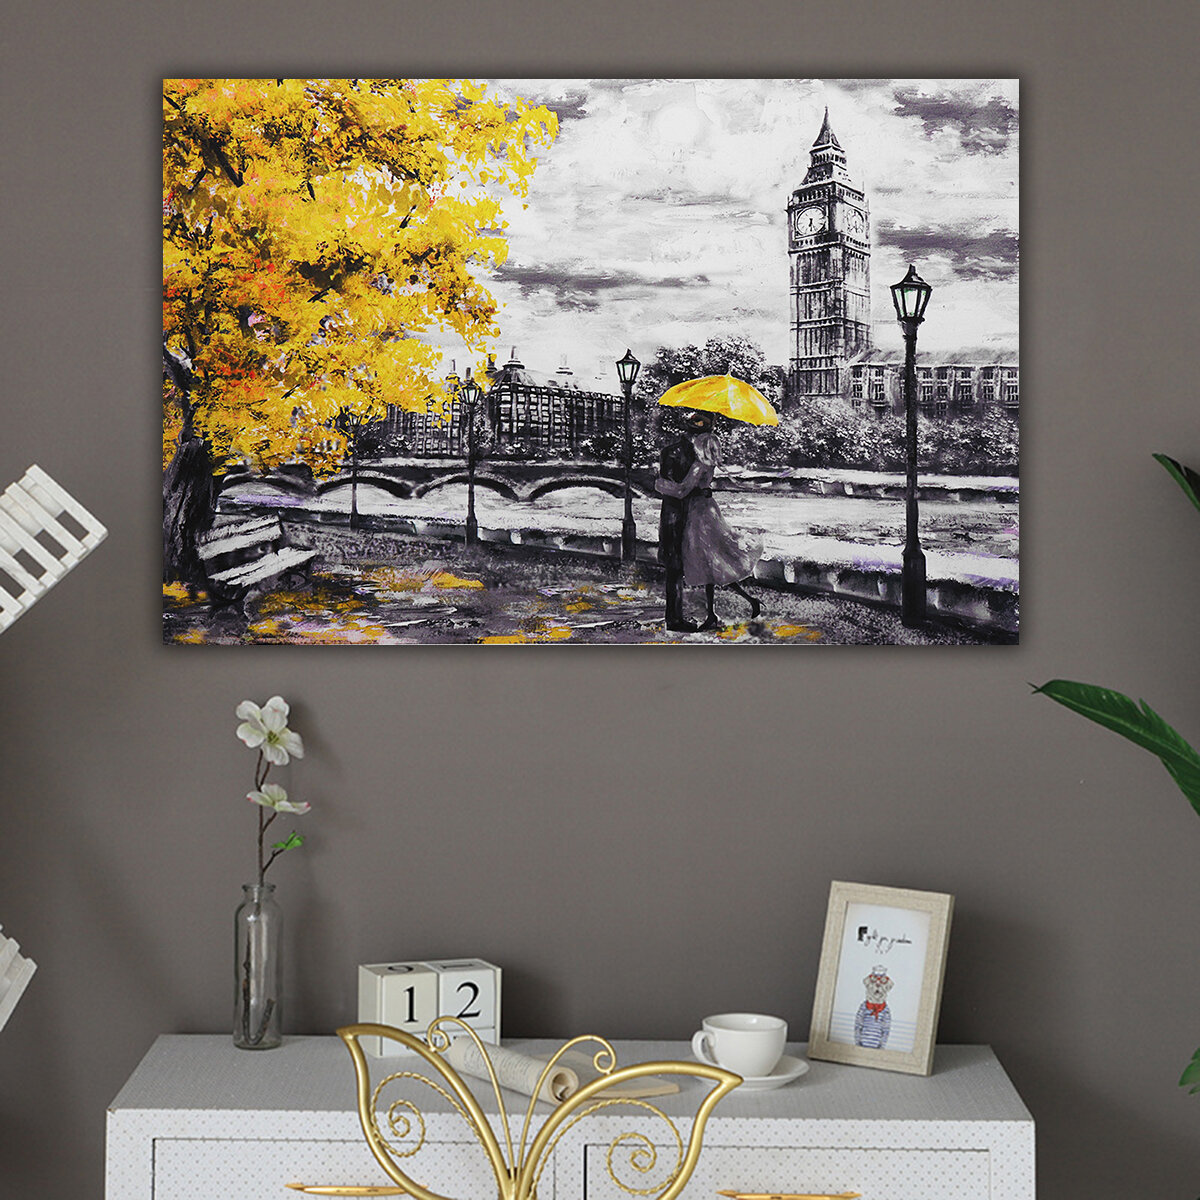 Autumn London Big Ben Canvas Painting Wall Decorative Print Art Picture Unframed Wall Hanging Home O